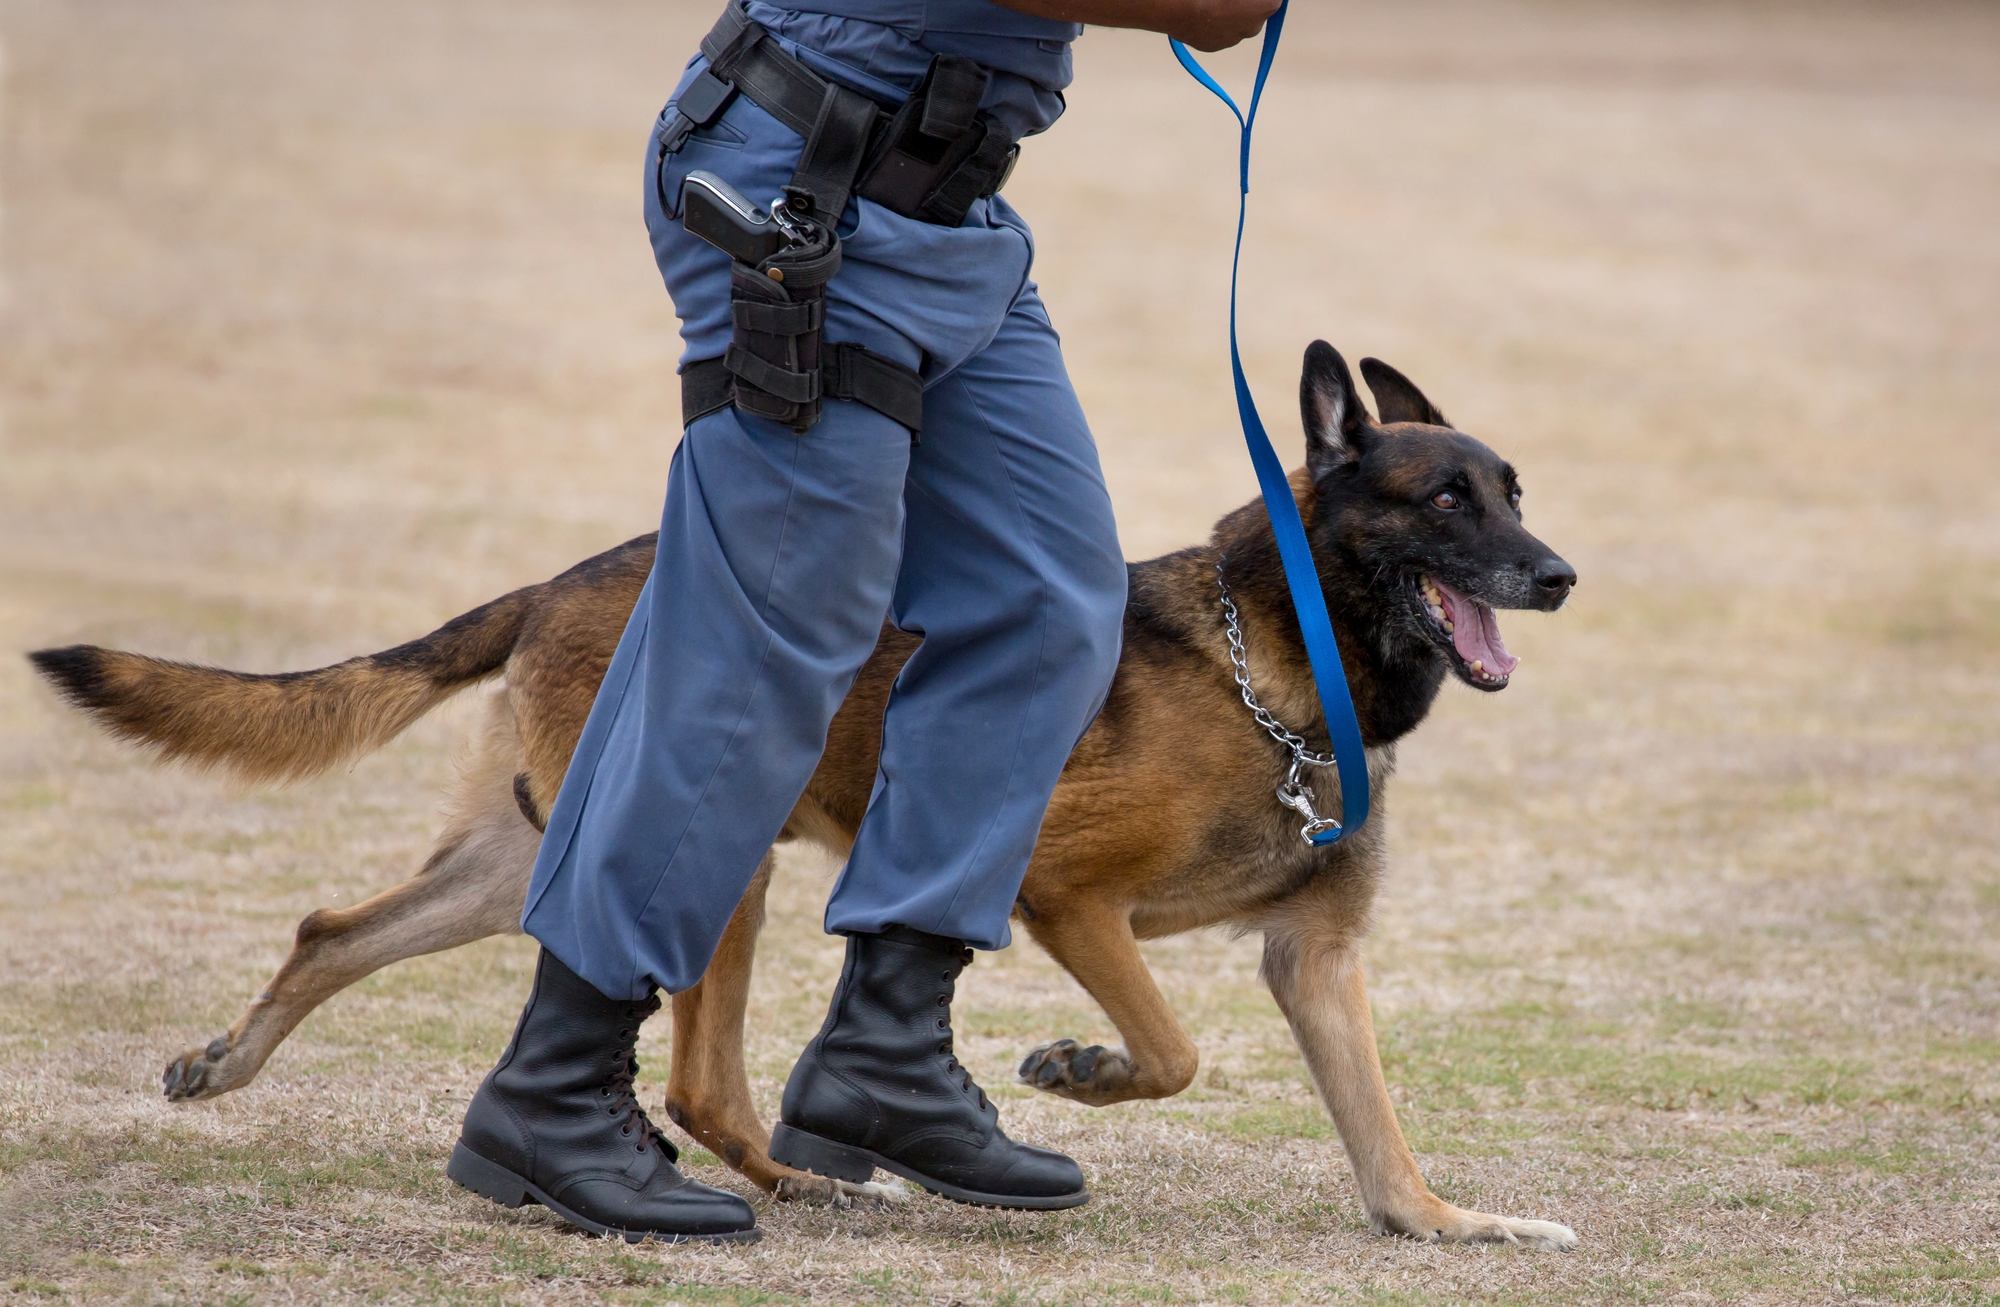 A trained German Shepherd, one of the best executive protective dogs, on duty with a security officer